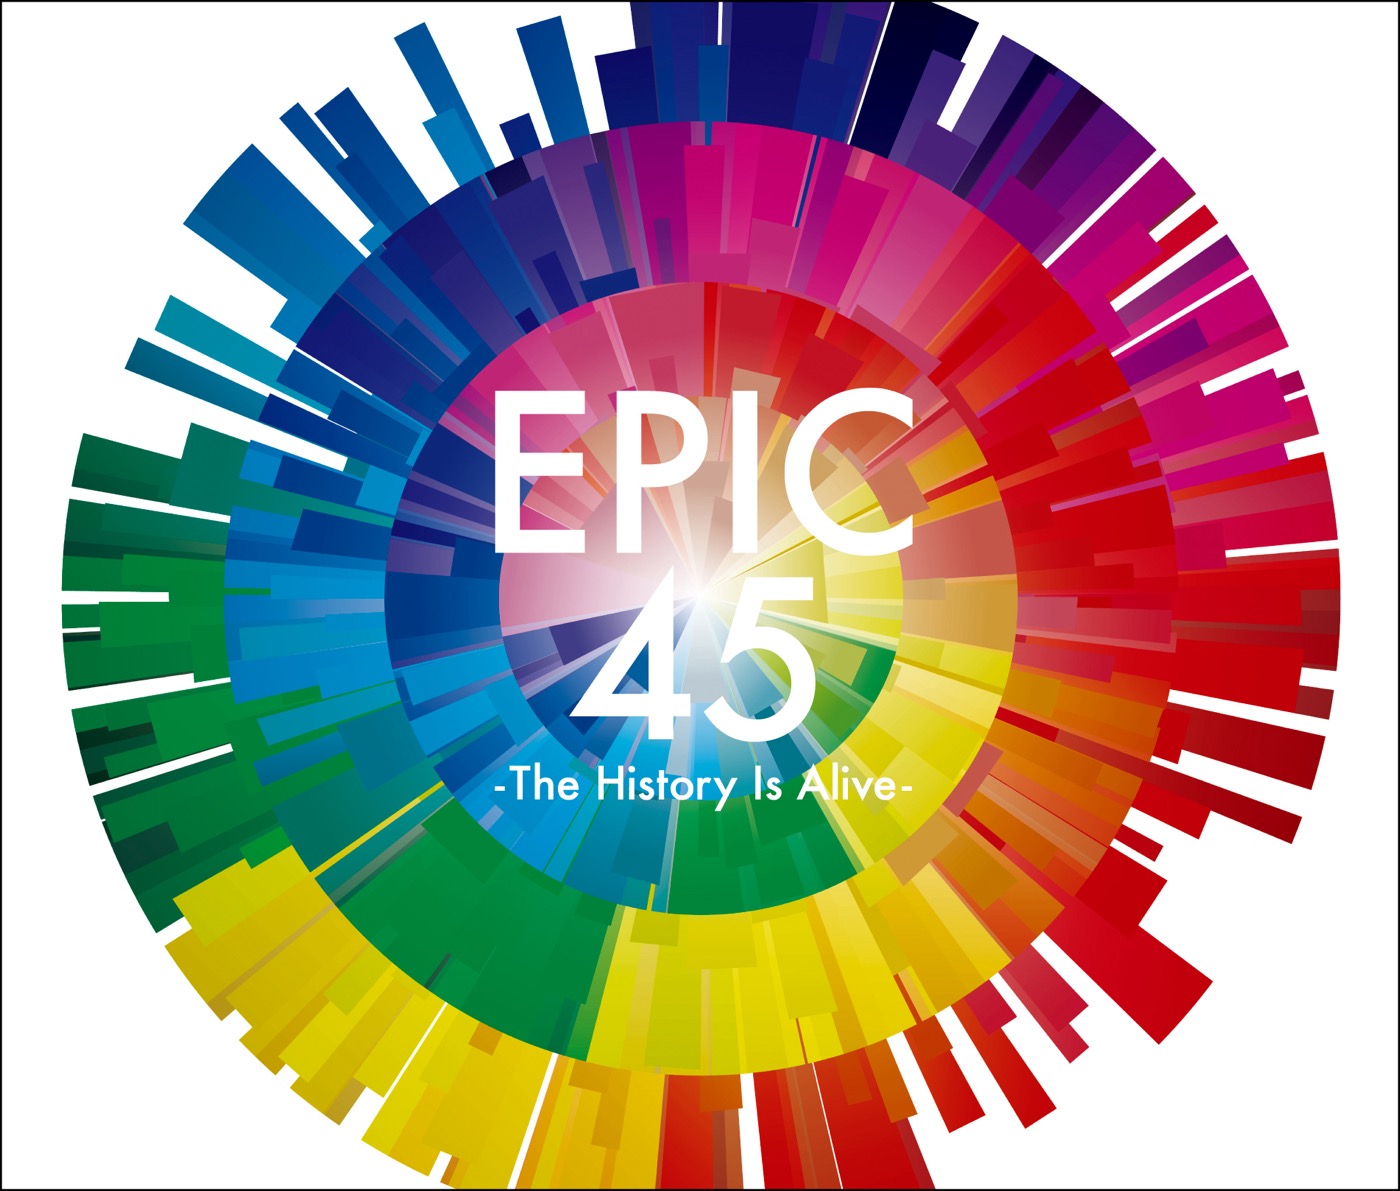 EPICレーベルの45年を彩った名曲を収録した3枚組コンピレーション『EPIC 45 -The History Is Alive-』のリリースが決定 - 画像一覧（1/1）